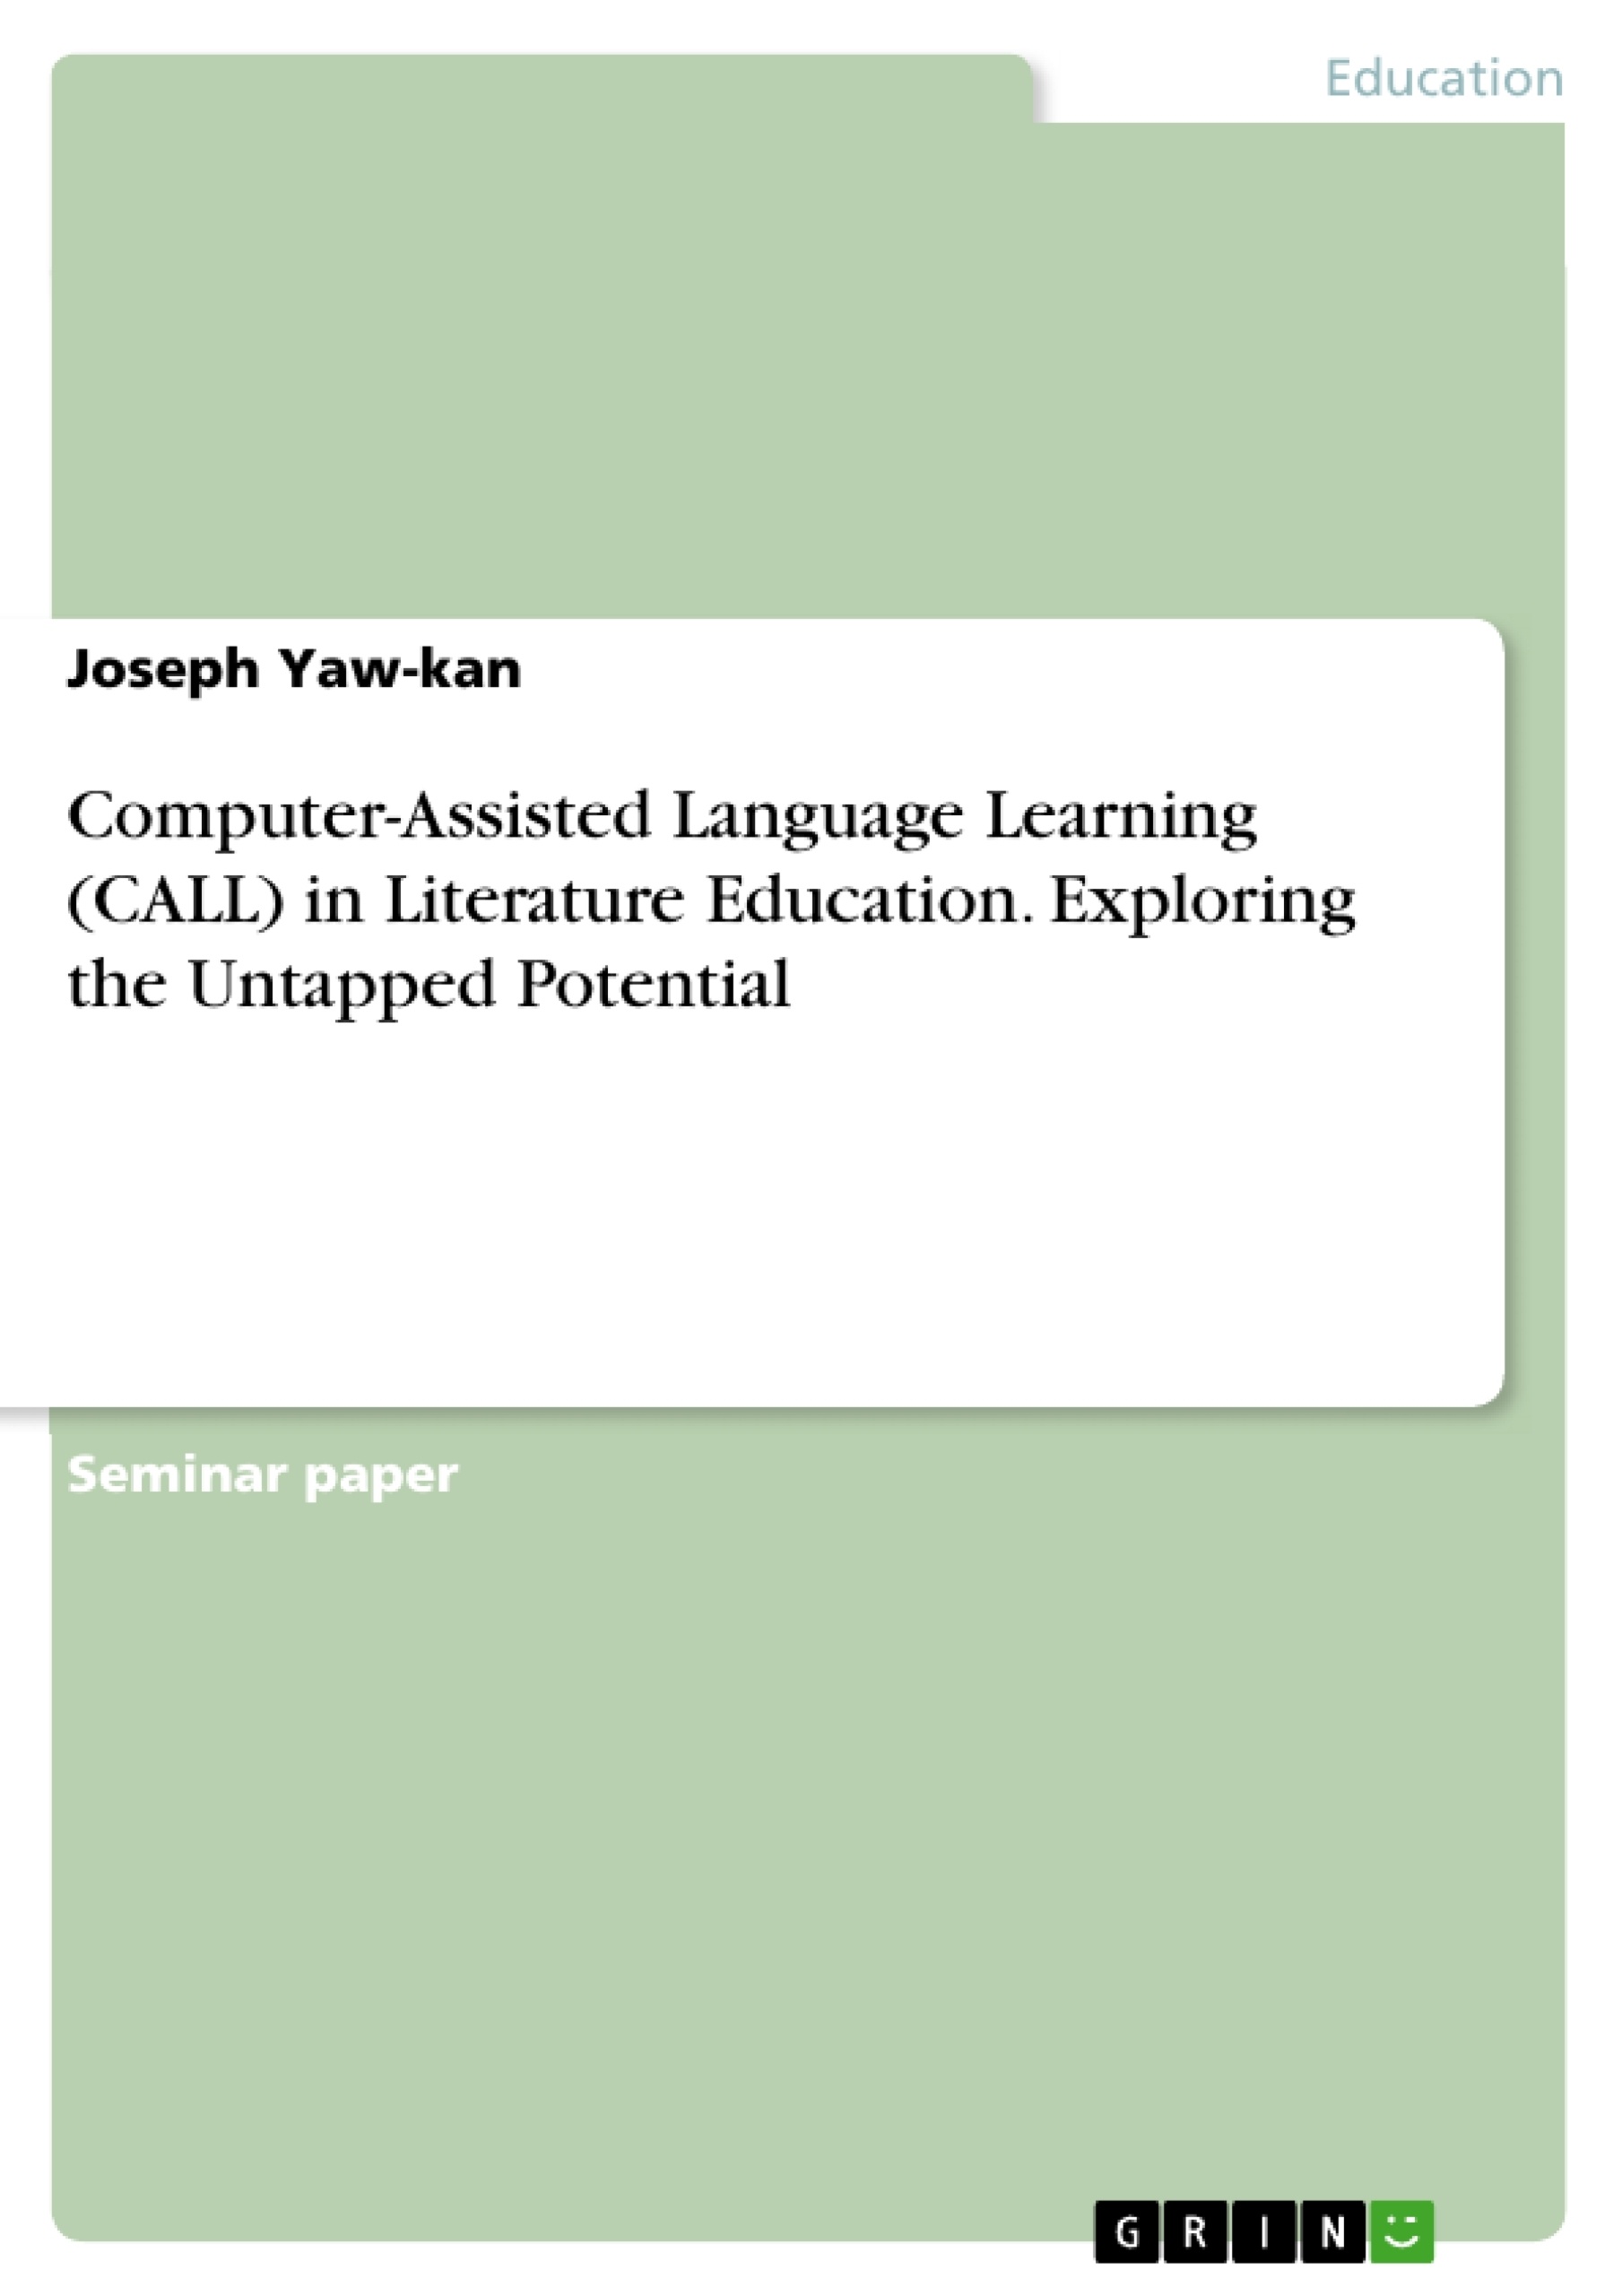 Title: Computer-Assisted Language Learning (CALL) in Literature Education. Exploring the Untapped Potential